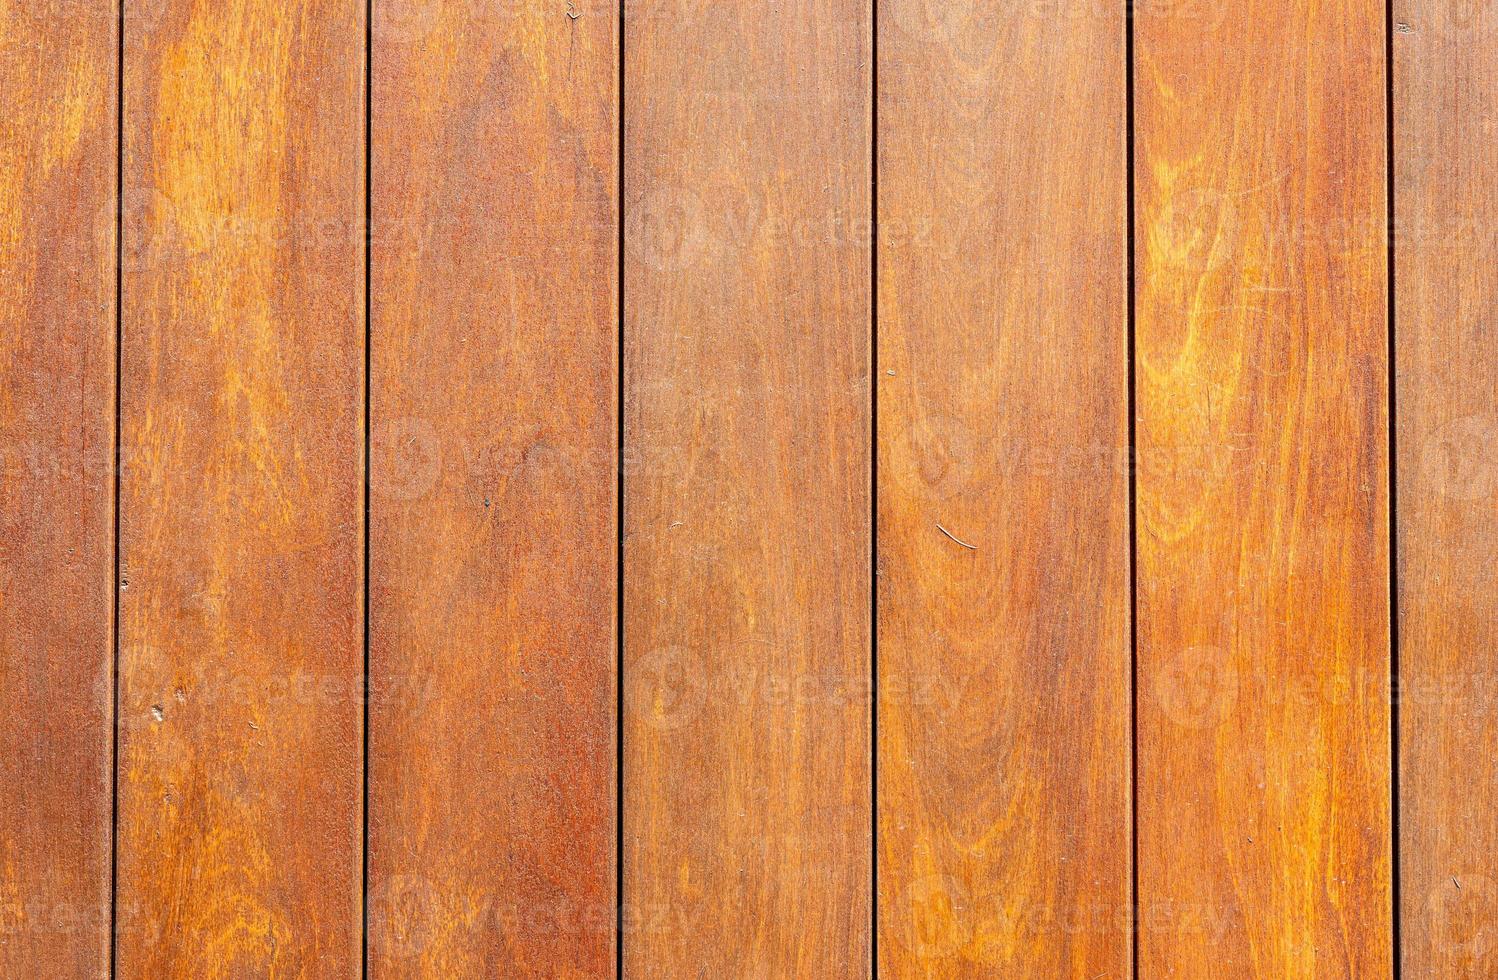 Vertical brown wooden planks texture background made of dark natural wood in grunge style. Copy space for design or text. photo